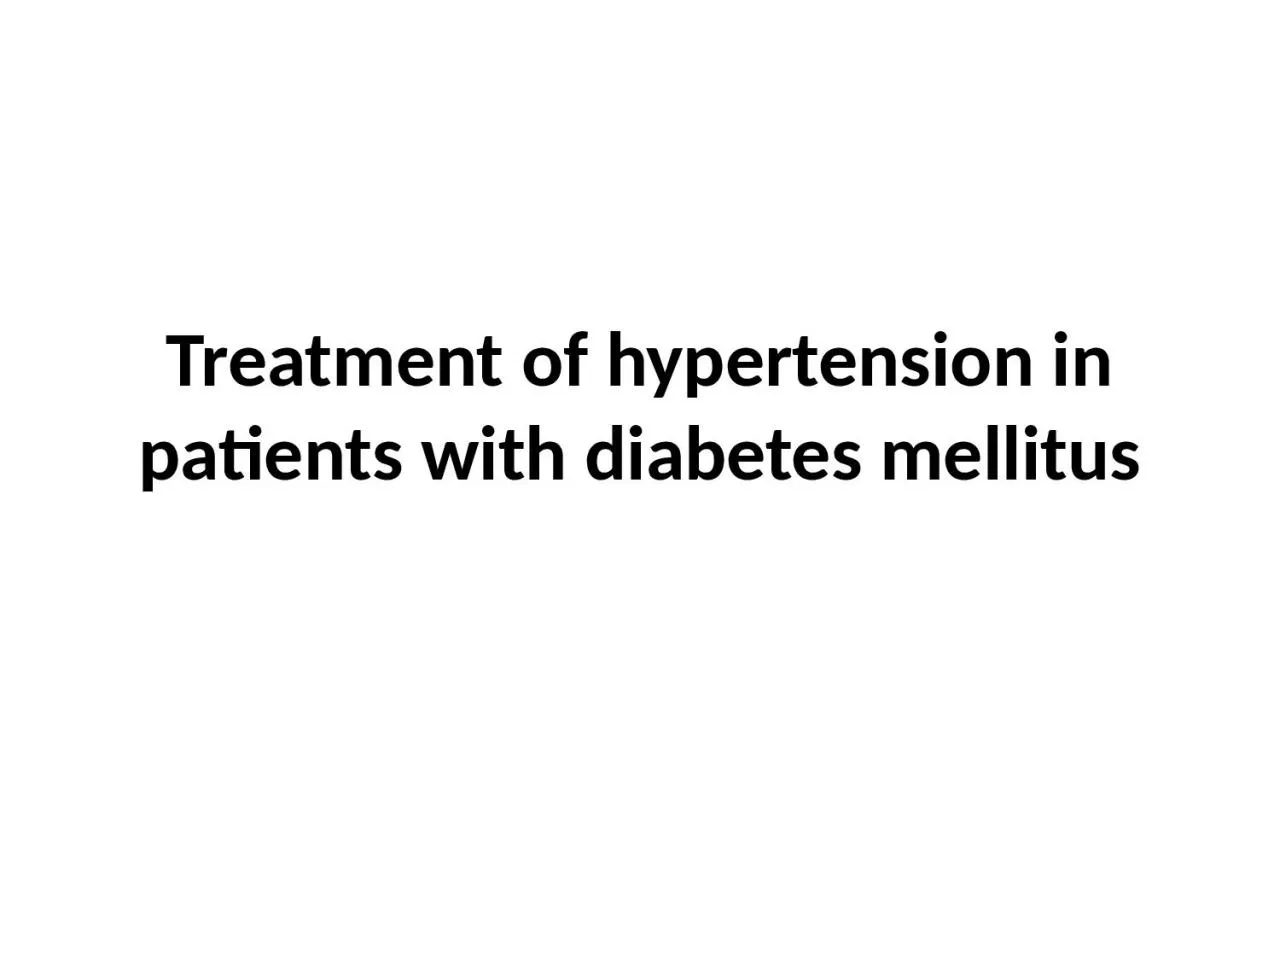 Treatment of hypertension in patients with diabetes mellitus